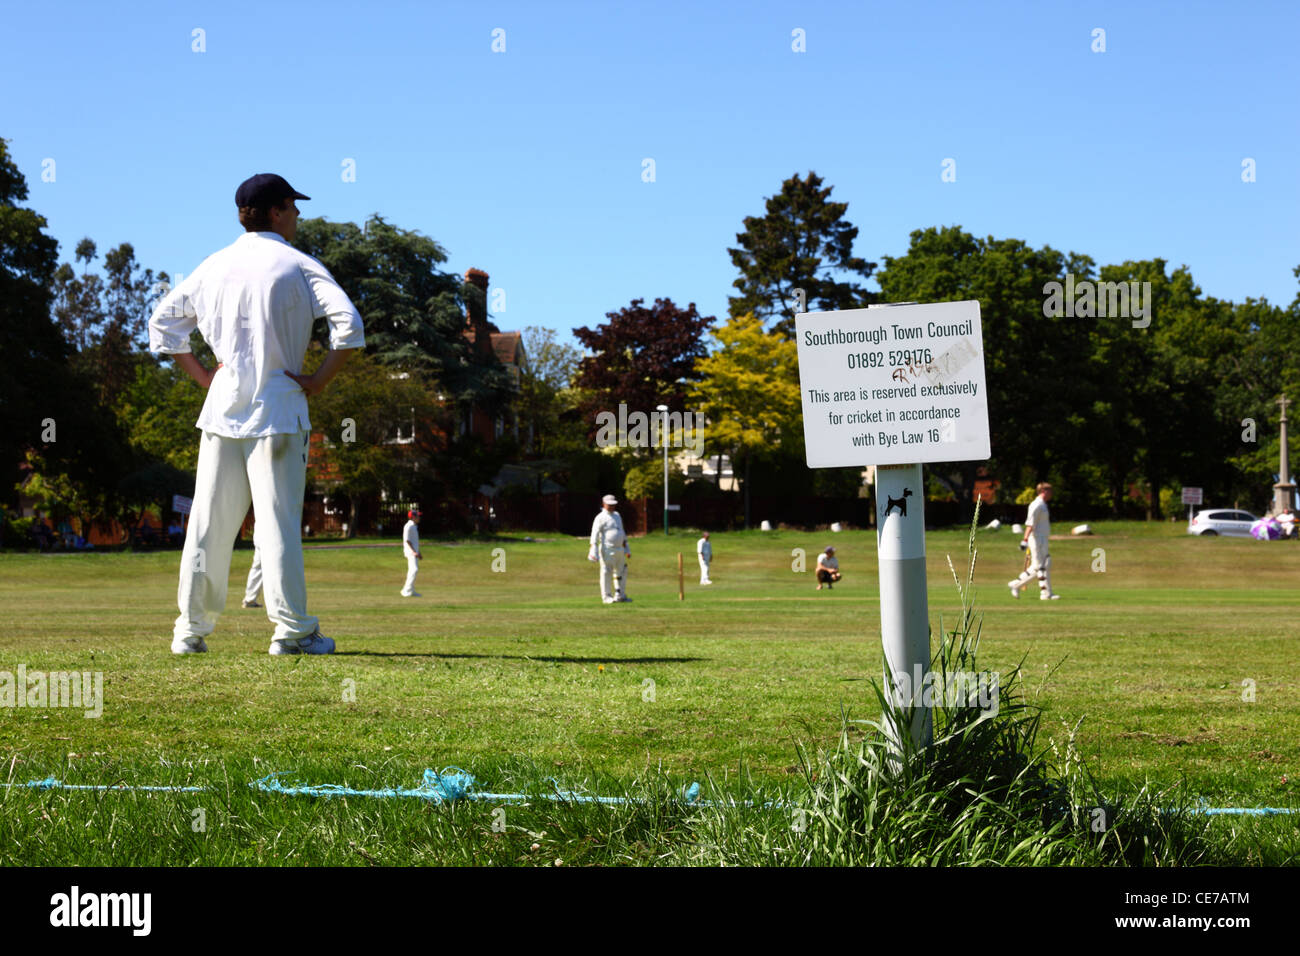 Local Bye Law sign next to pitch, cricket match in progress , Southborough Common , near Tunbridge Wells , Kent , England Stock Photo